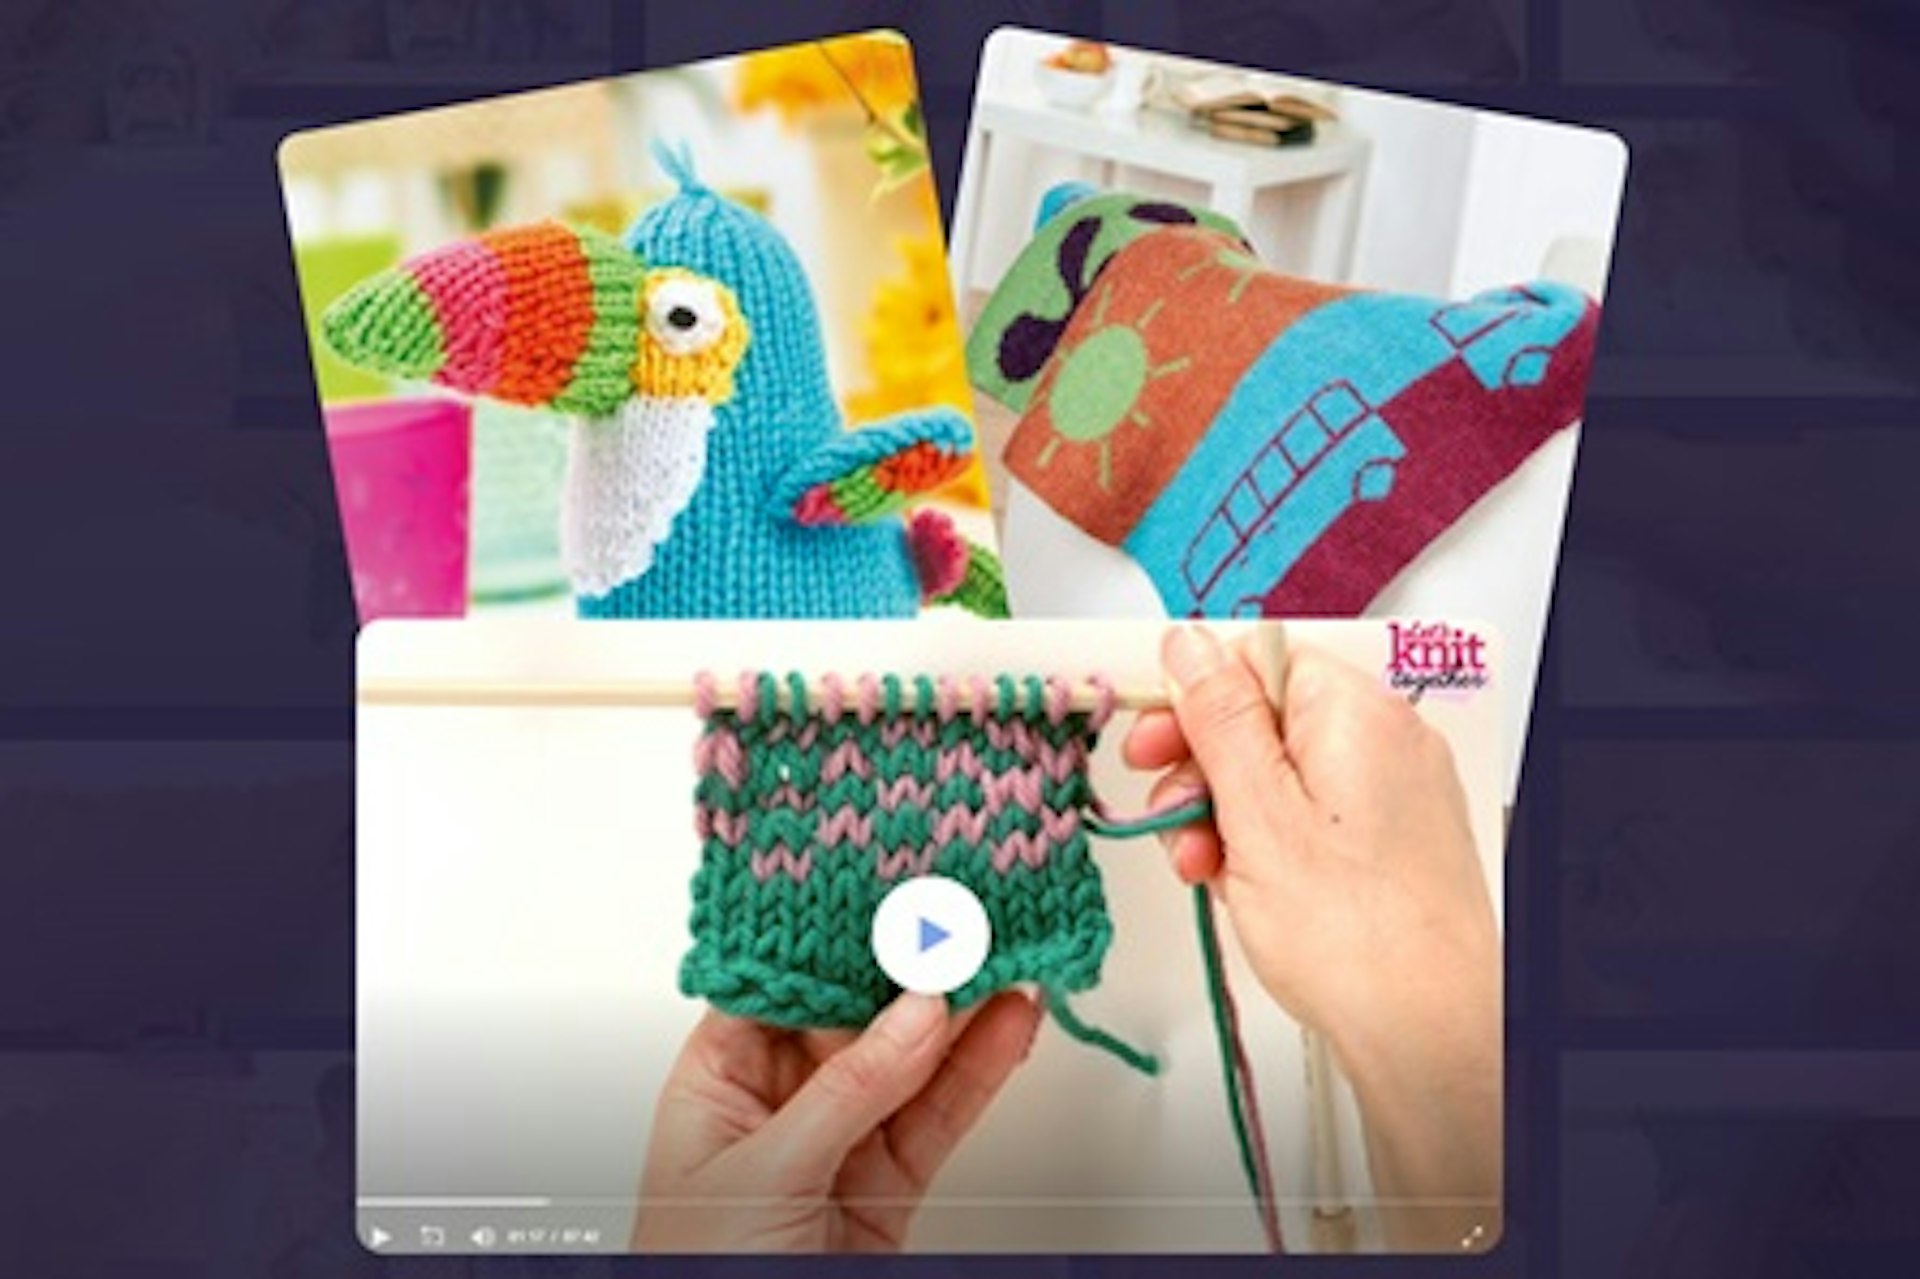 Let’s Knit Together Three Month Membership 4